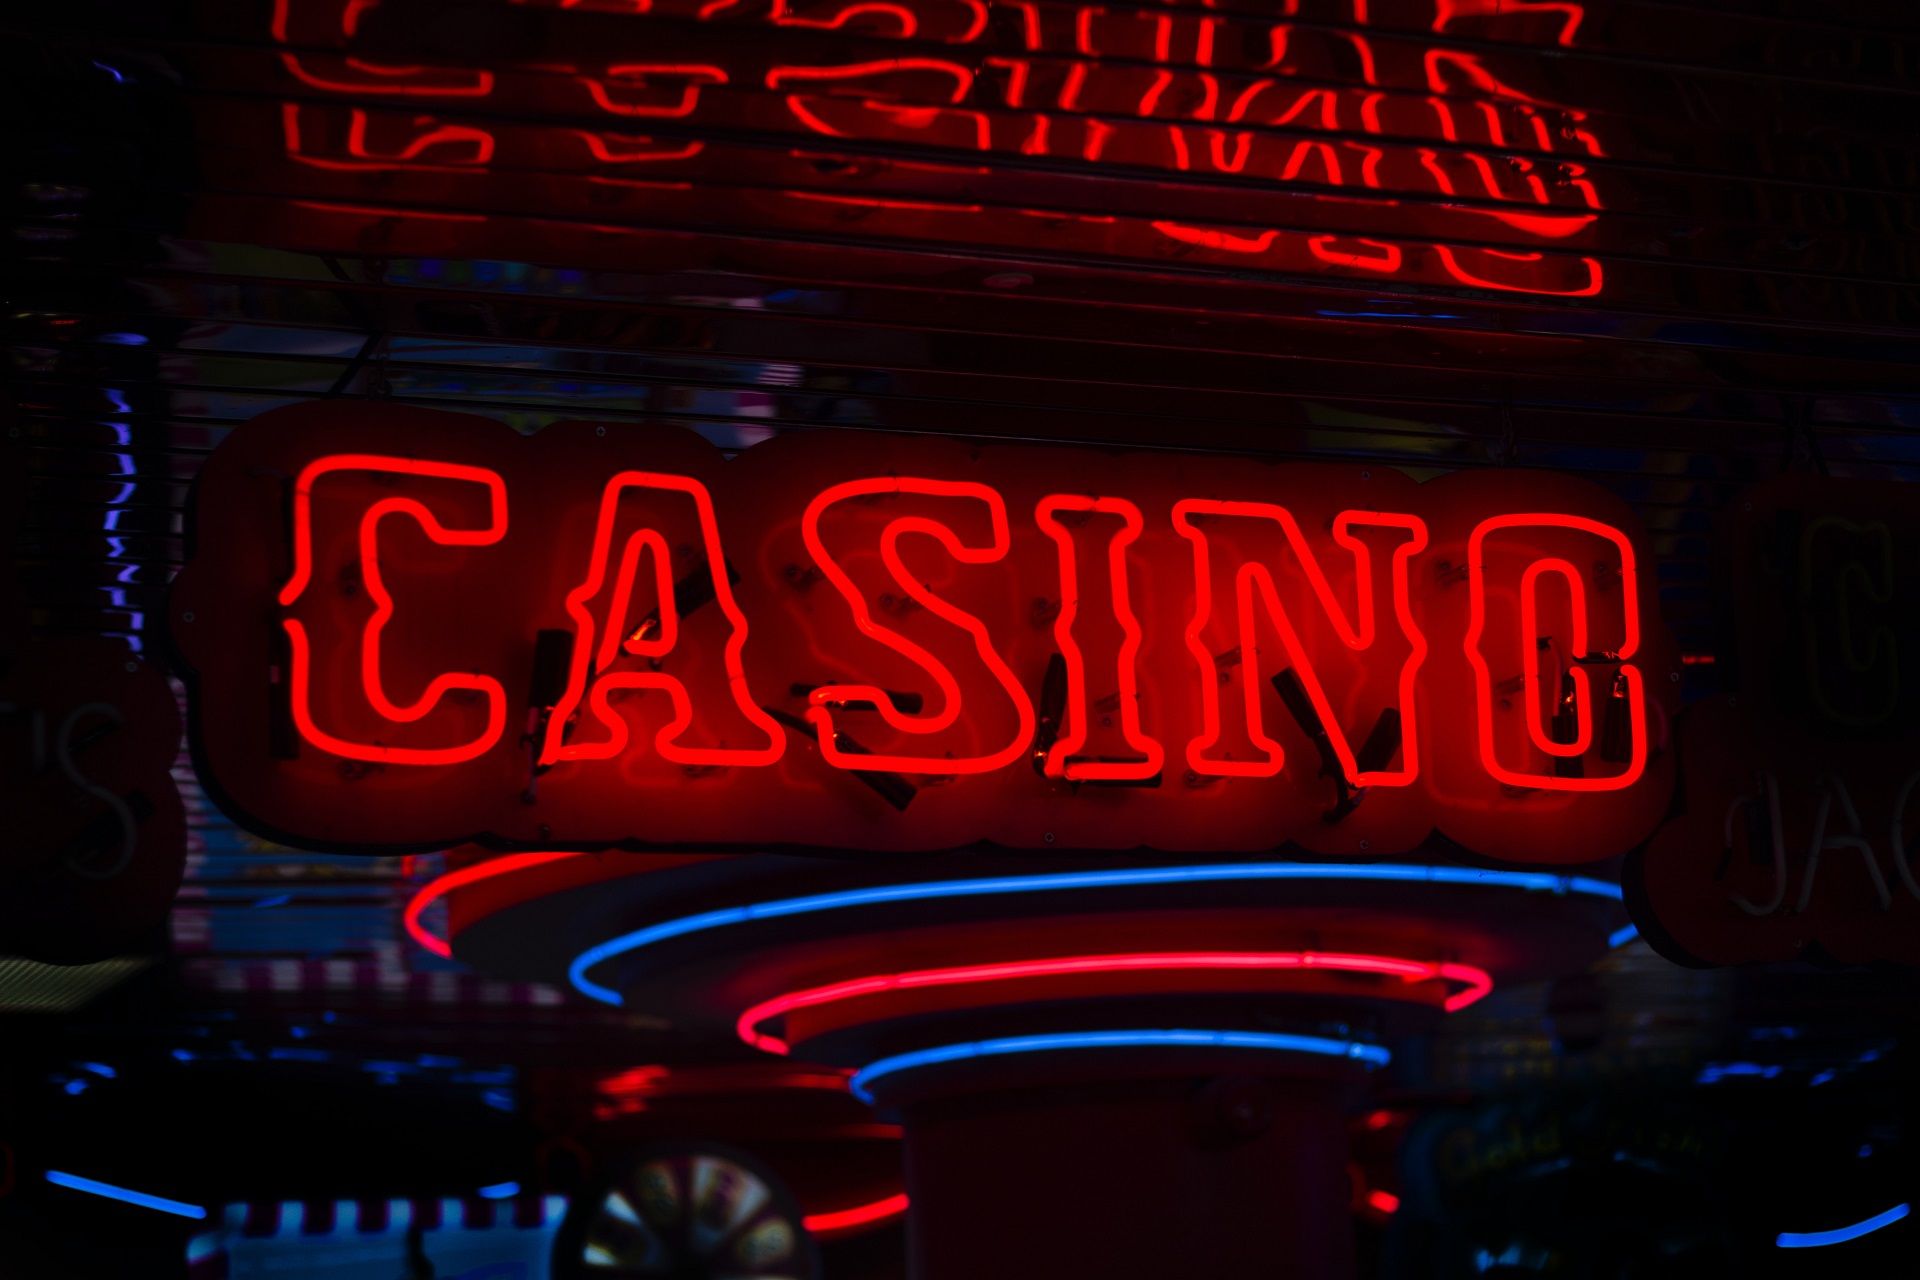 The Relationship Between Tourists and Casino